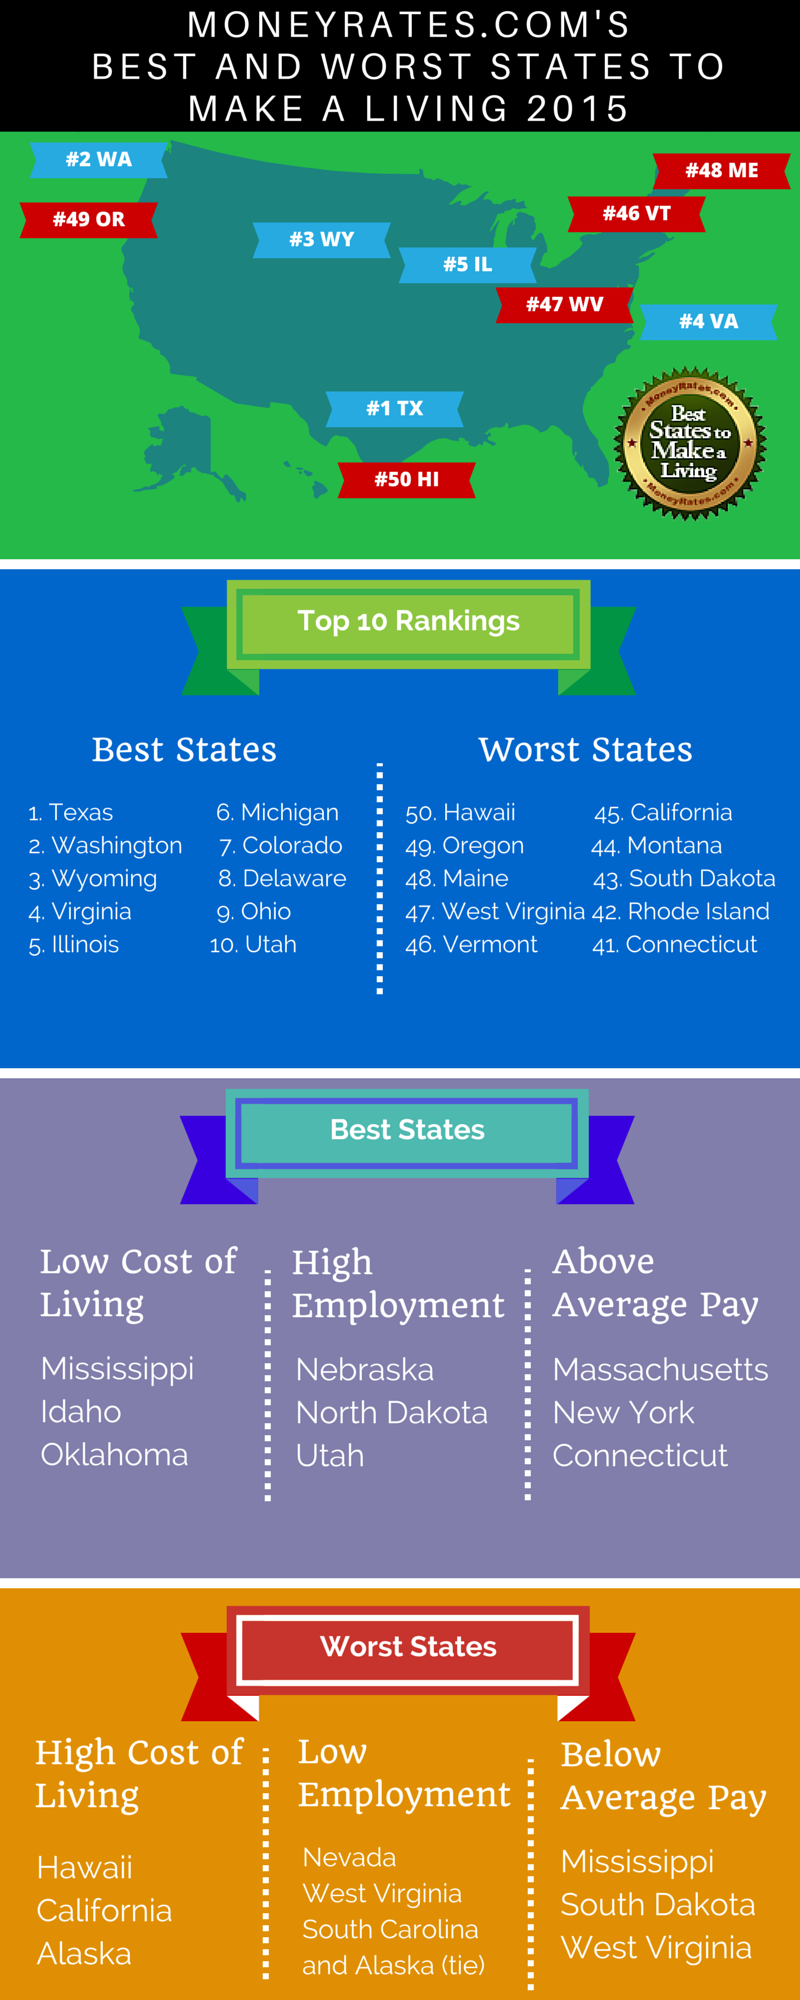 Best States to Make a Living